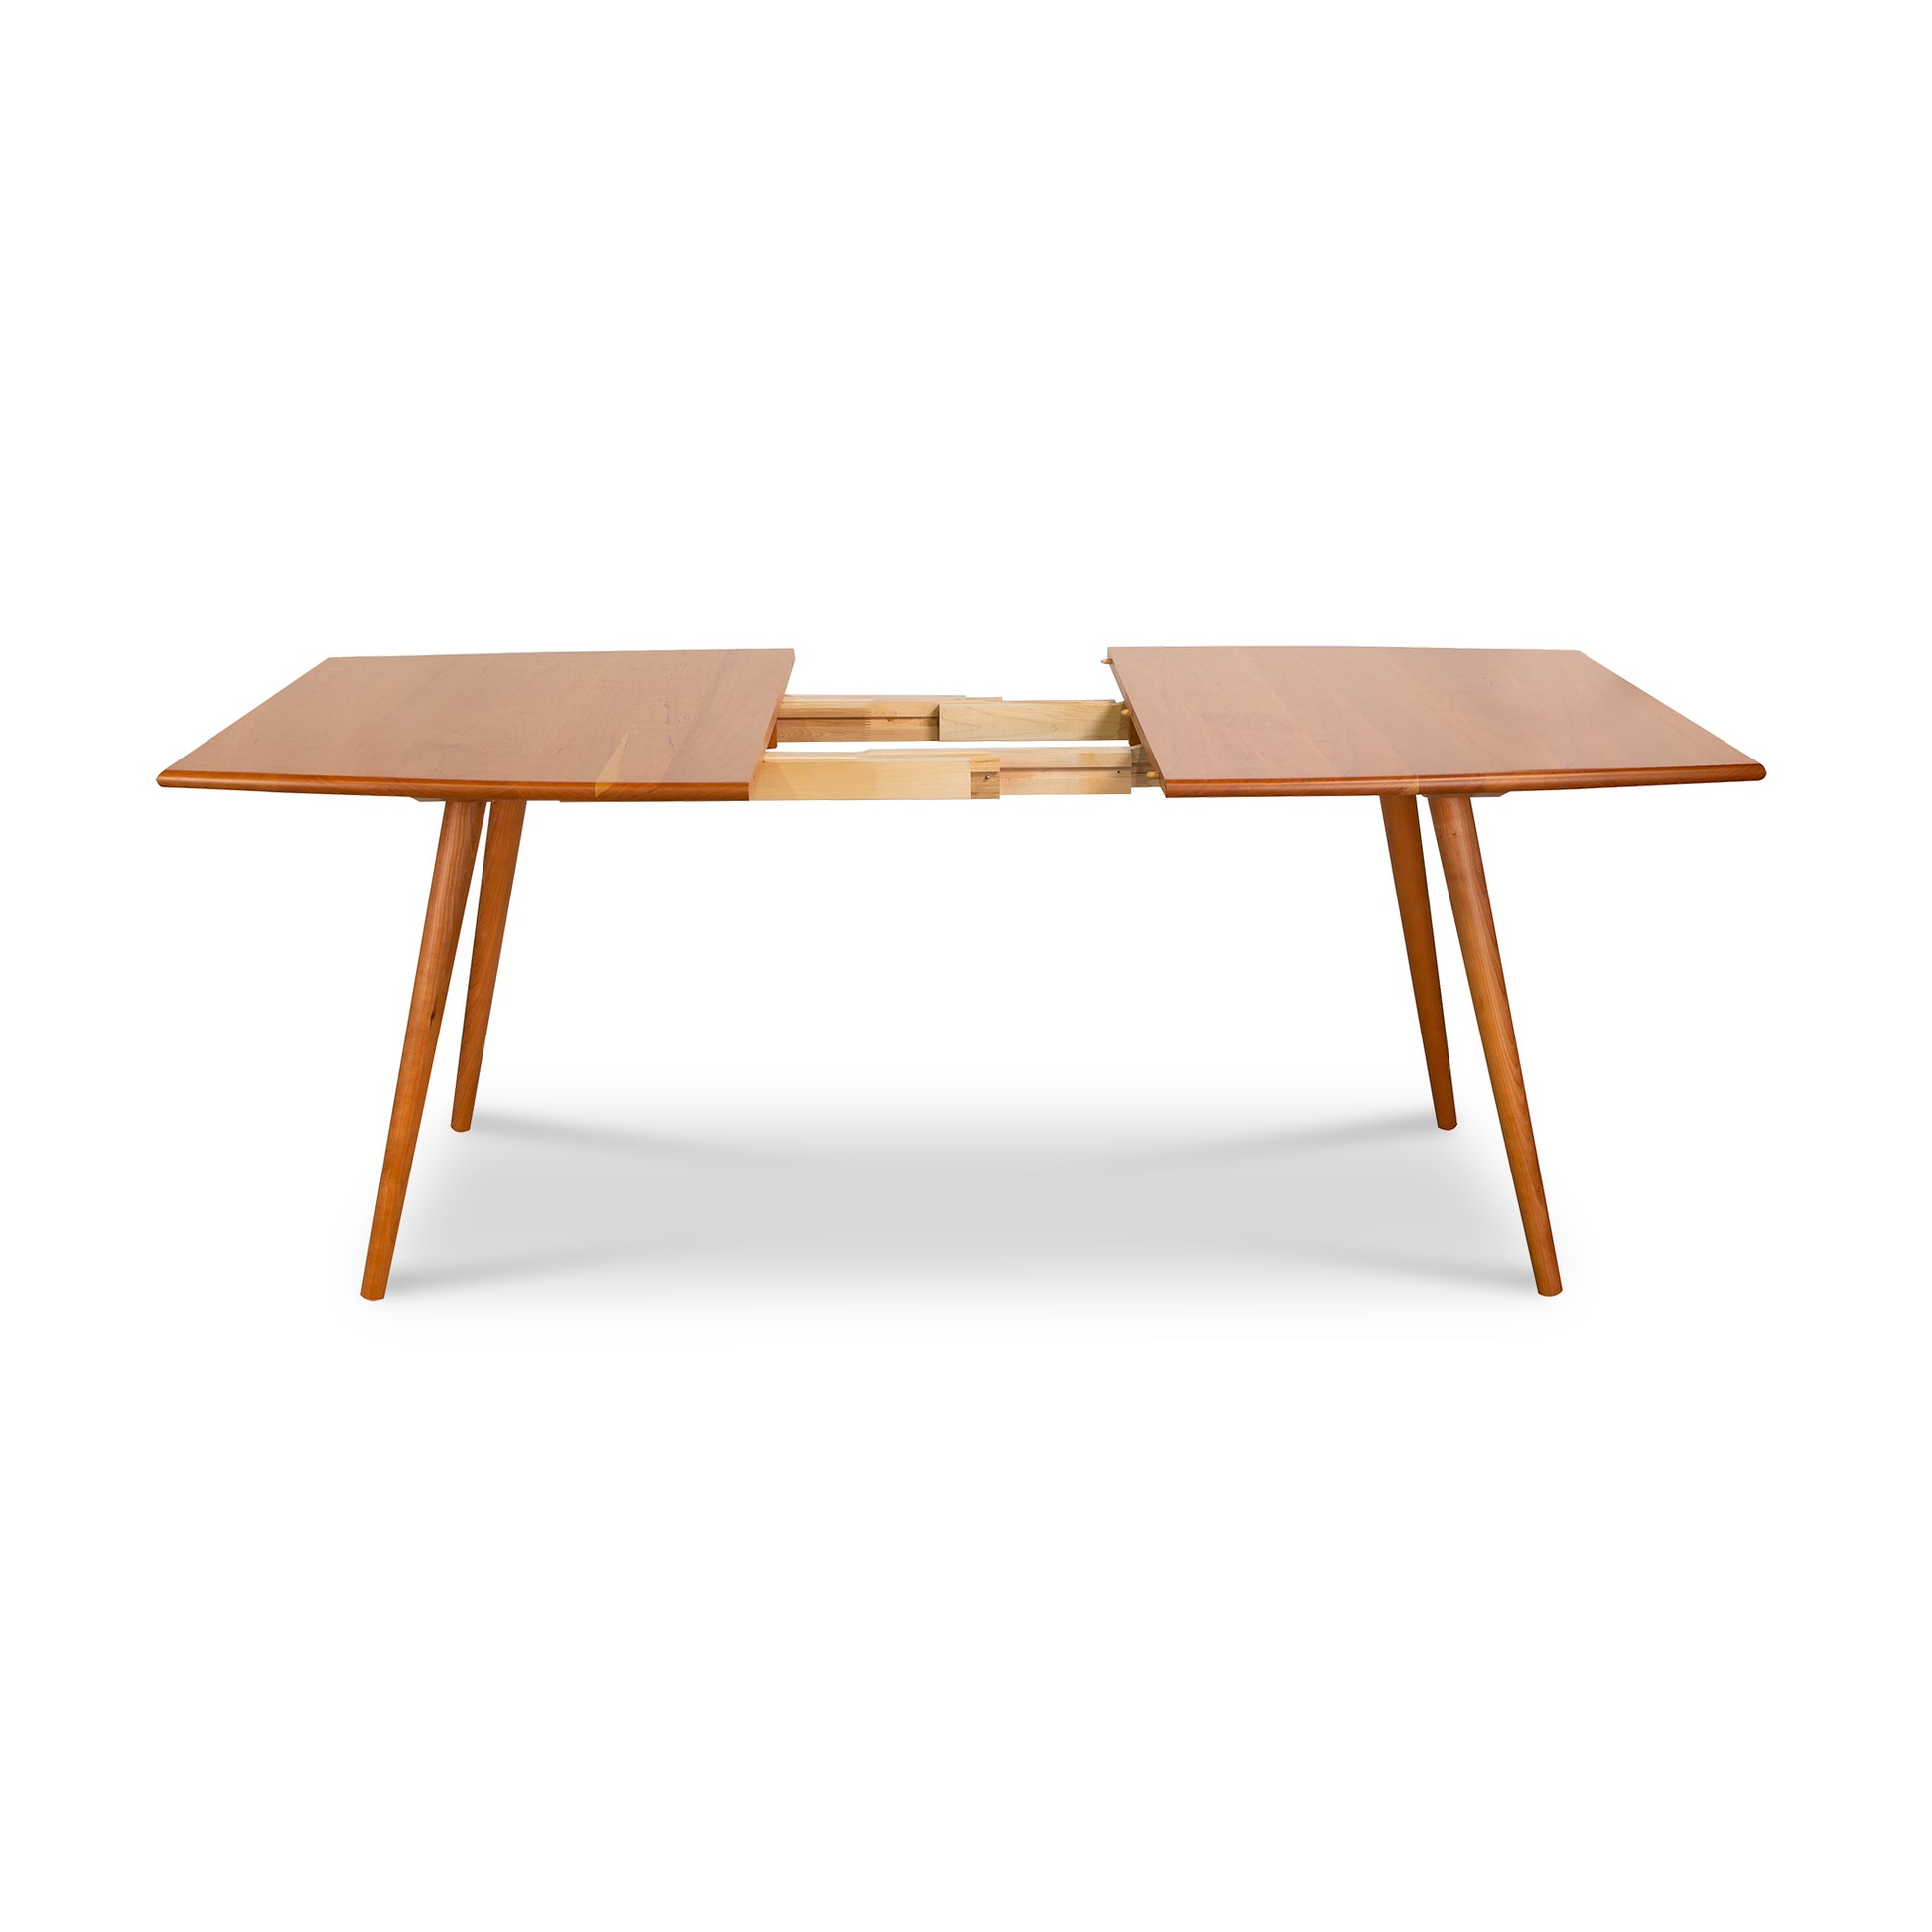 The Lyndon Furniture Addison Boat Top Extension Dining Table is a stunning example of a mid-century modern dining room table crafted from natural cherry wood. With its sleek design and unique two-leg structure, this wooden dining table.